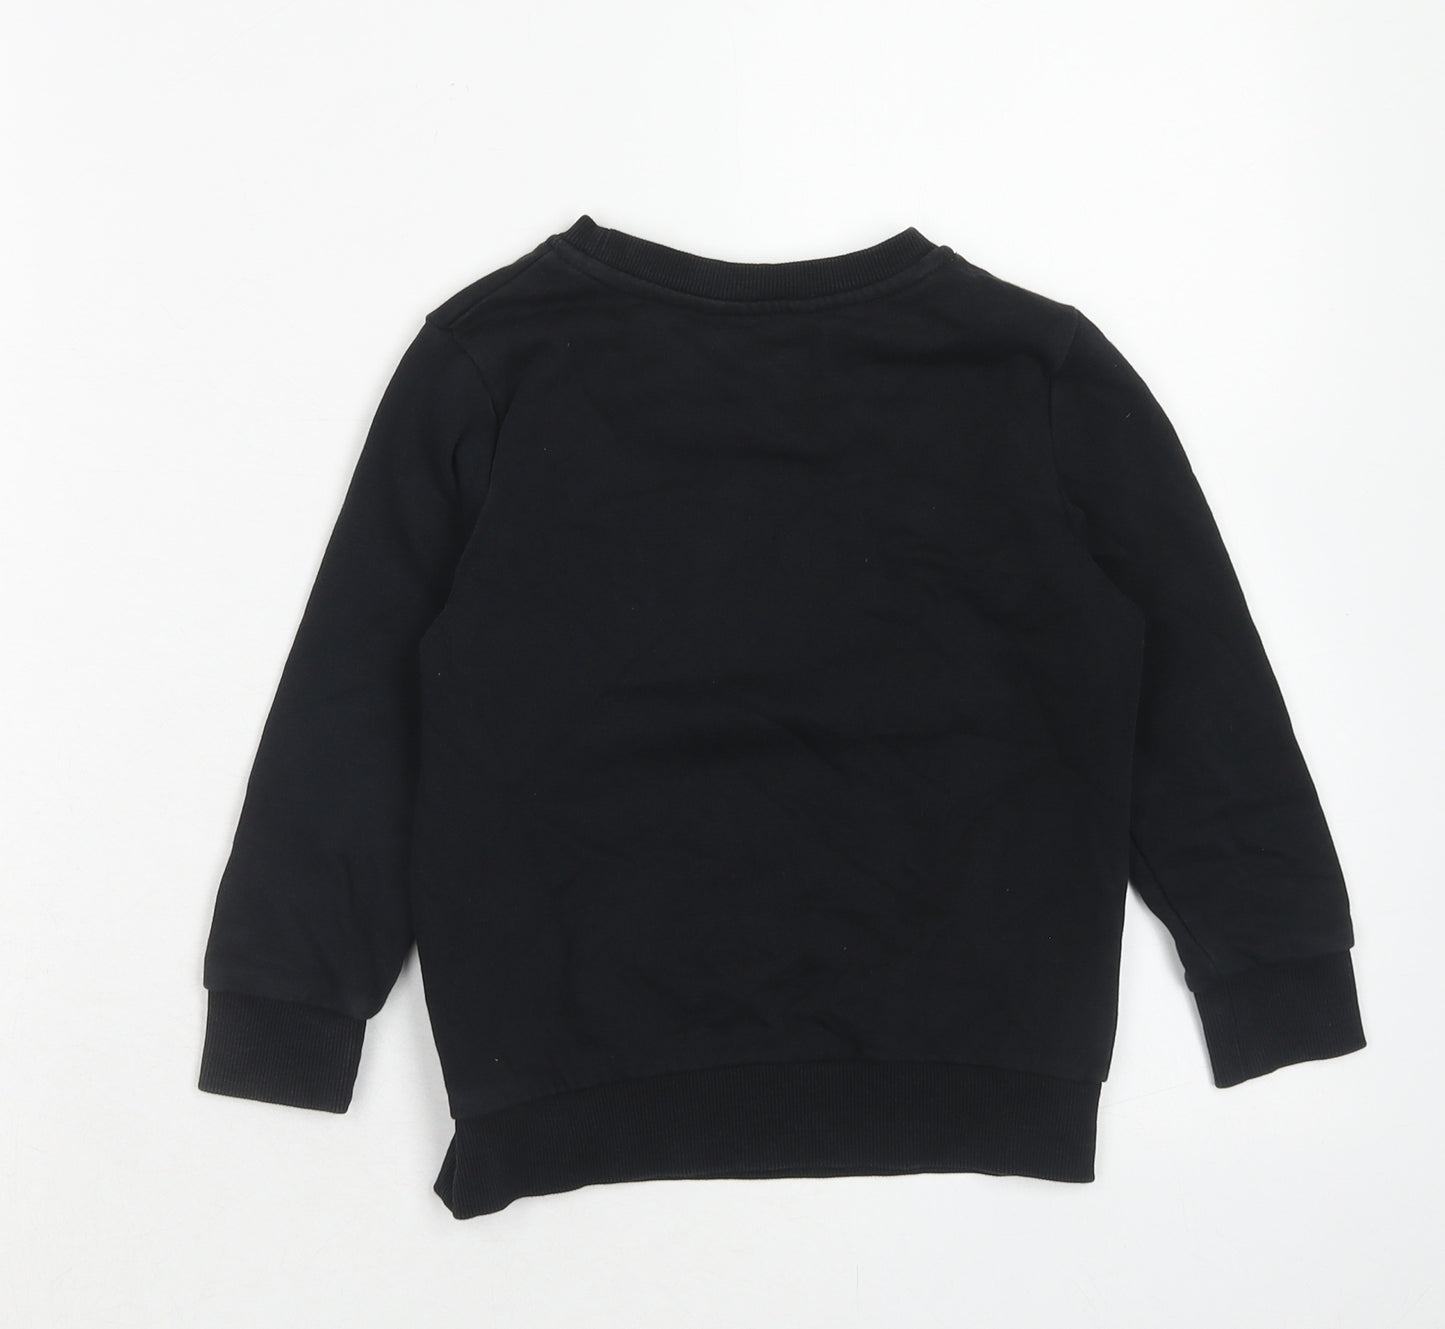 George Boys Black Cotton Pullover Sweatshirt Size 3-4 Years Pullover - Epic